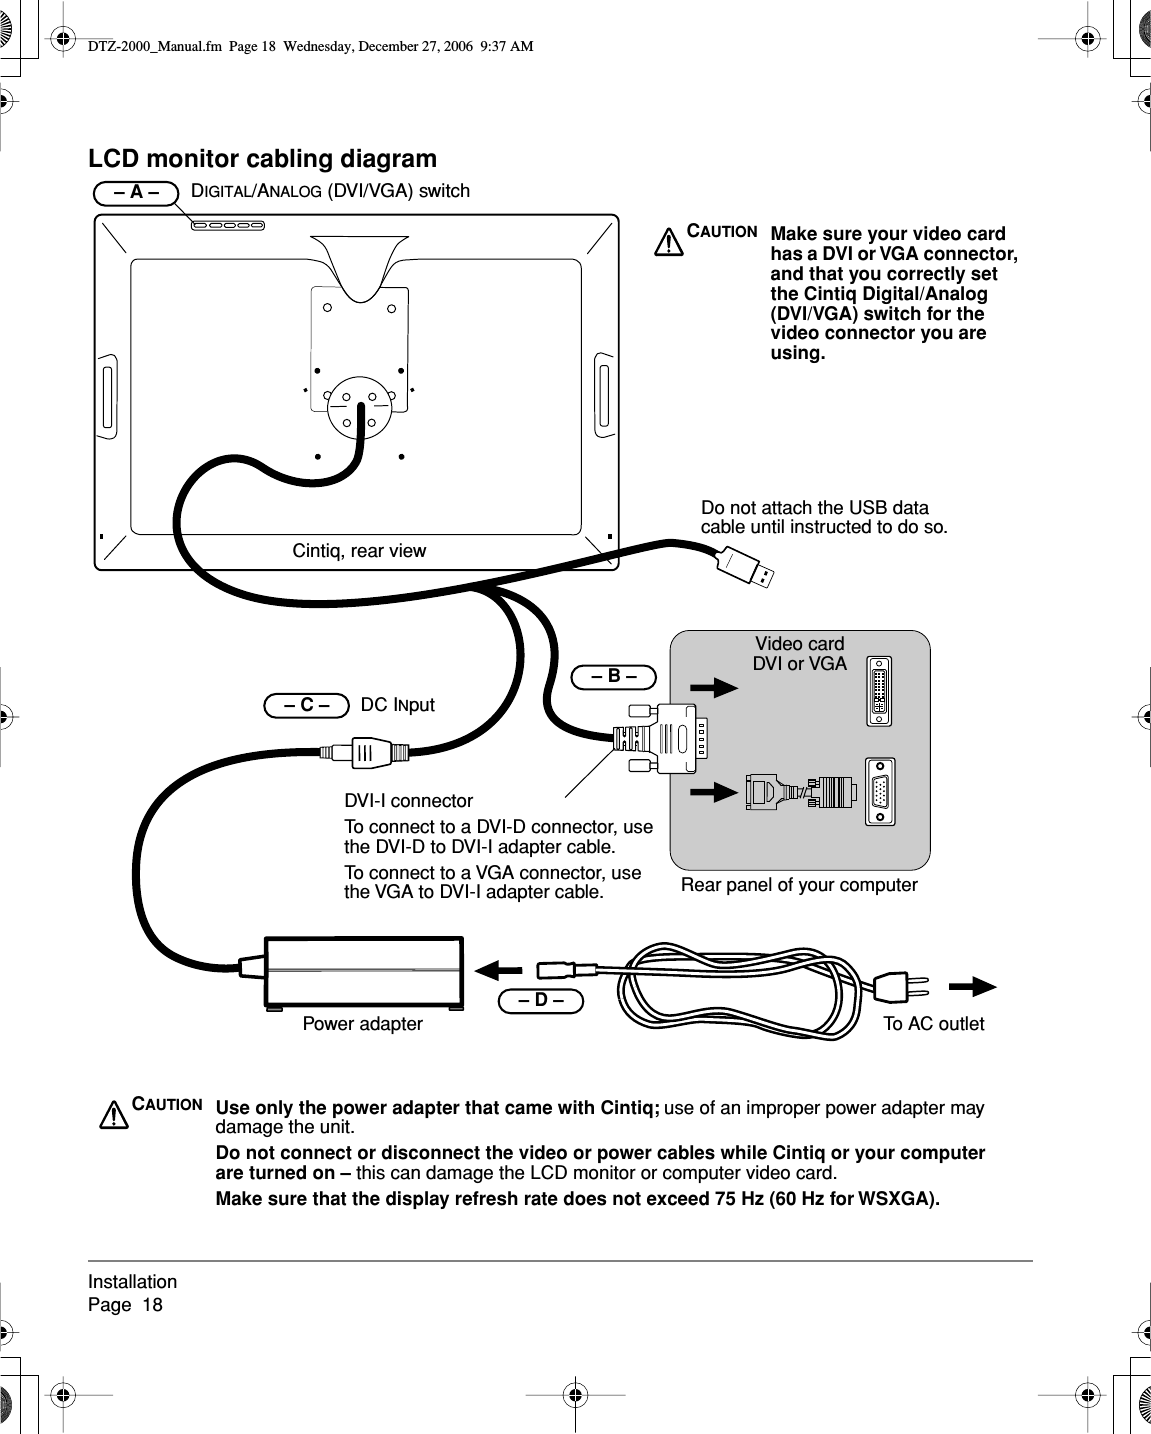 InstallationPage  18LCD monitor cabling diagramCintiq, rear view    – B – Video cardDVI or VGARear panel of your computerDo not attach the USB data cable until instructed to do so.Power adapter– C –      DC INputTo AC outletDVI-I connectorTo connect to a DVI-D connector, use the DVI-D to DVI-I adapter cable.To connect to a VGA connector, use the VGA to DVI-I adapter cable.    – D – CAUTION Make sure your video card has a DVI or VGA connector, and that you correctly set the Cintiq Digital/Analog (DVI/VGA) switch for the video connector you are using.CAUTION Use only the power adapter that came with Cintiq; use of an improper power adapter may damage the unit.Do not connect or disconnect the video or power cables while Cintiq or your computer are turned on – this can damage the LCD monitor or computer video card.Make sure that the display refresh rate does not exceed 75 Hz (60 Hz for WSXGA).DIGITAL/ANALOG (DVI/VGA) switch– A –  DTZ-2000_Manual.fm  Page 18  Wednesday, December 27, 2006  9:37 AM